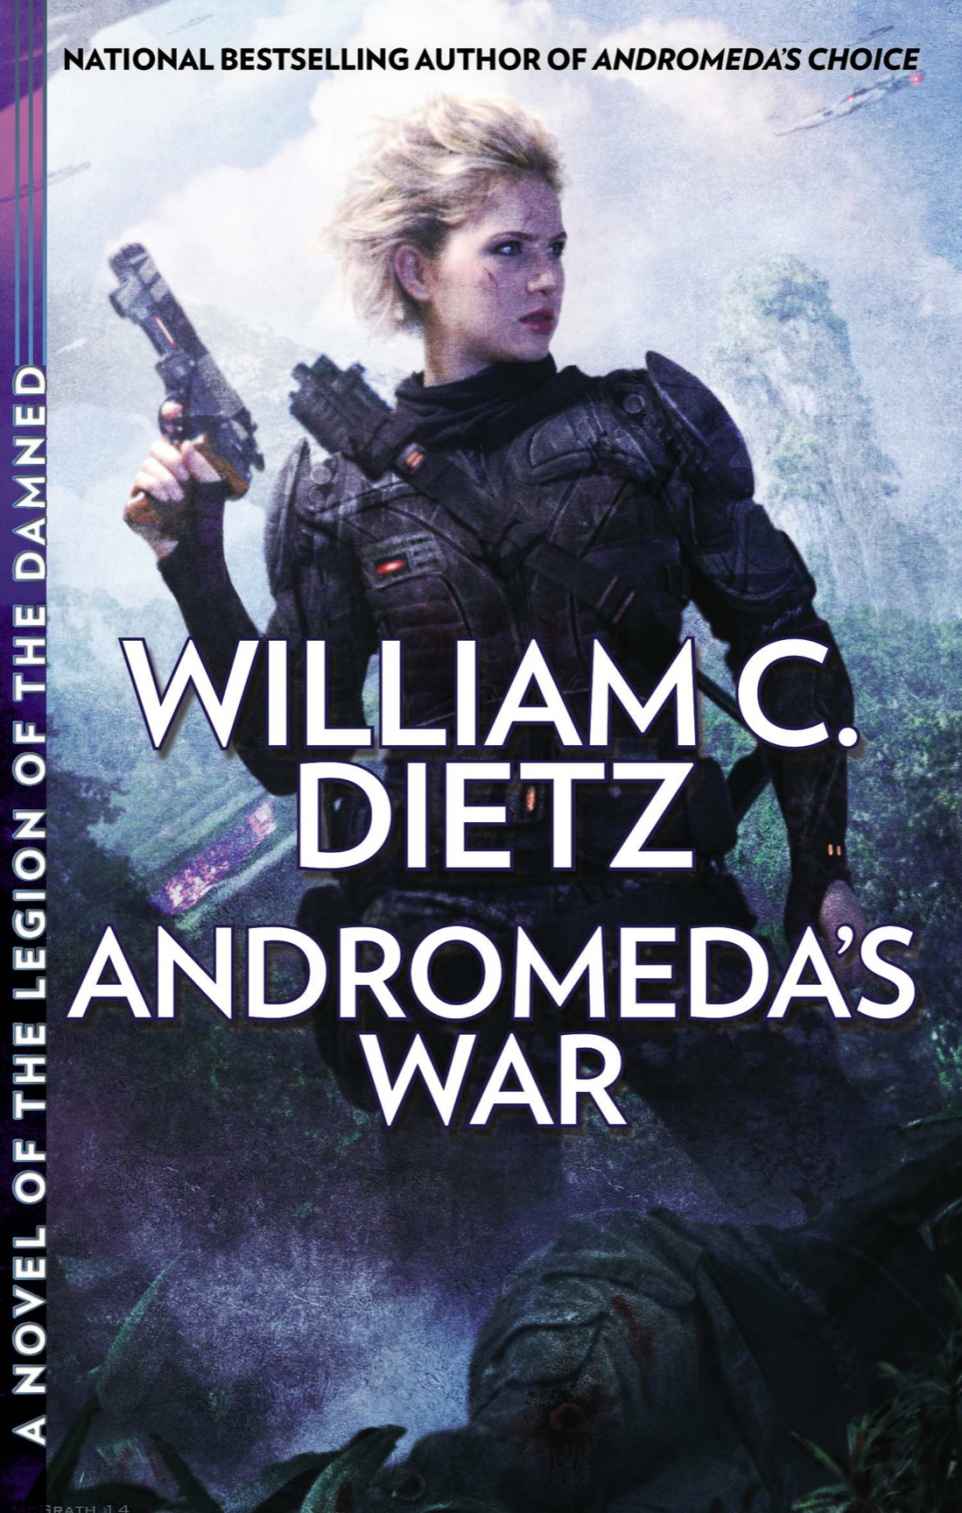 Andromeda's War (Legion of the Damned Book 3)